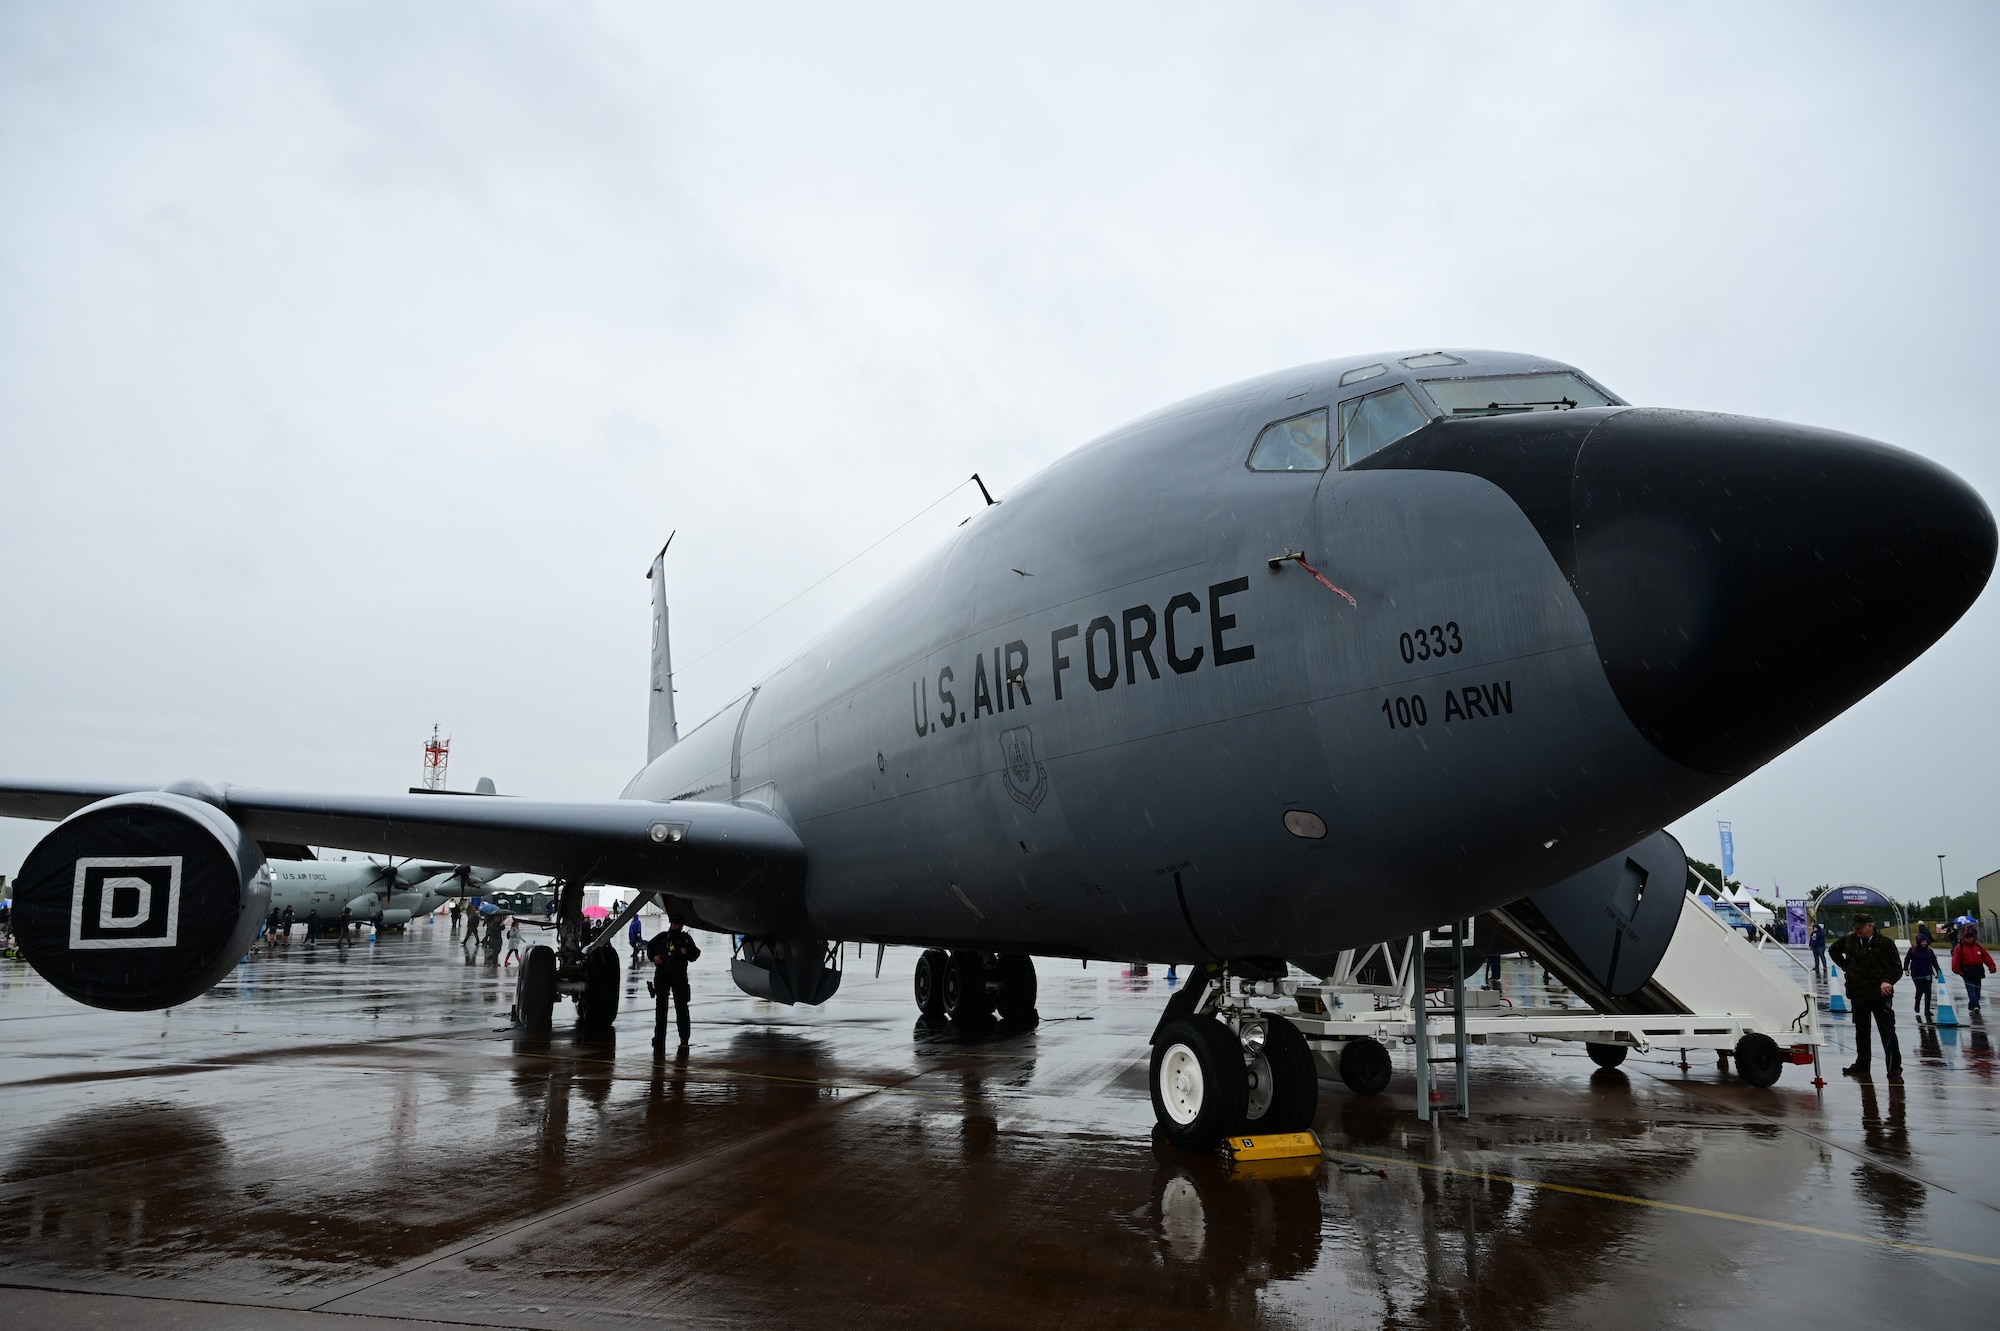 A U.S. KC-135 Stratotanker is displayed at the 2023 Royal International Air Tattoo at RAF Fairford, England, July 14, 2023. Known as the world’s largest military airshow, RIAT is an international exhibition that provides an opportunity for the U.S. Air Force to strengthen relationships and display interoperability with partner nations from around the globe. (U.S. Air Force photo by 1st Lt. Symantha King)